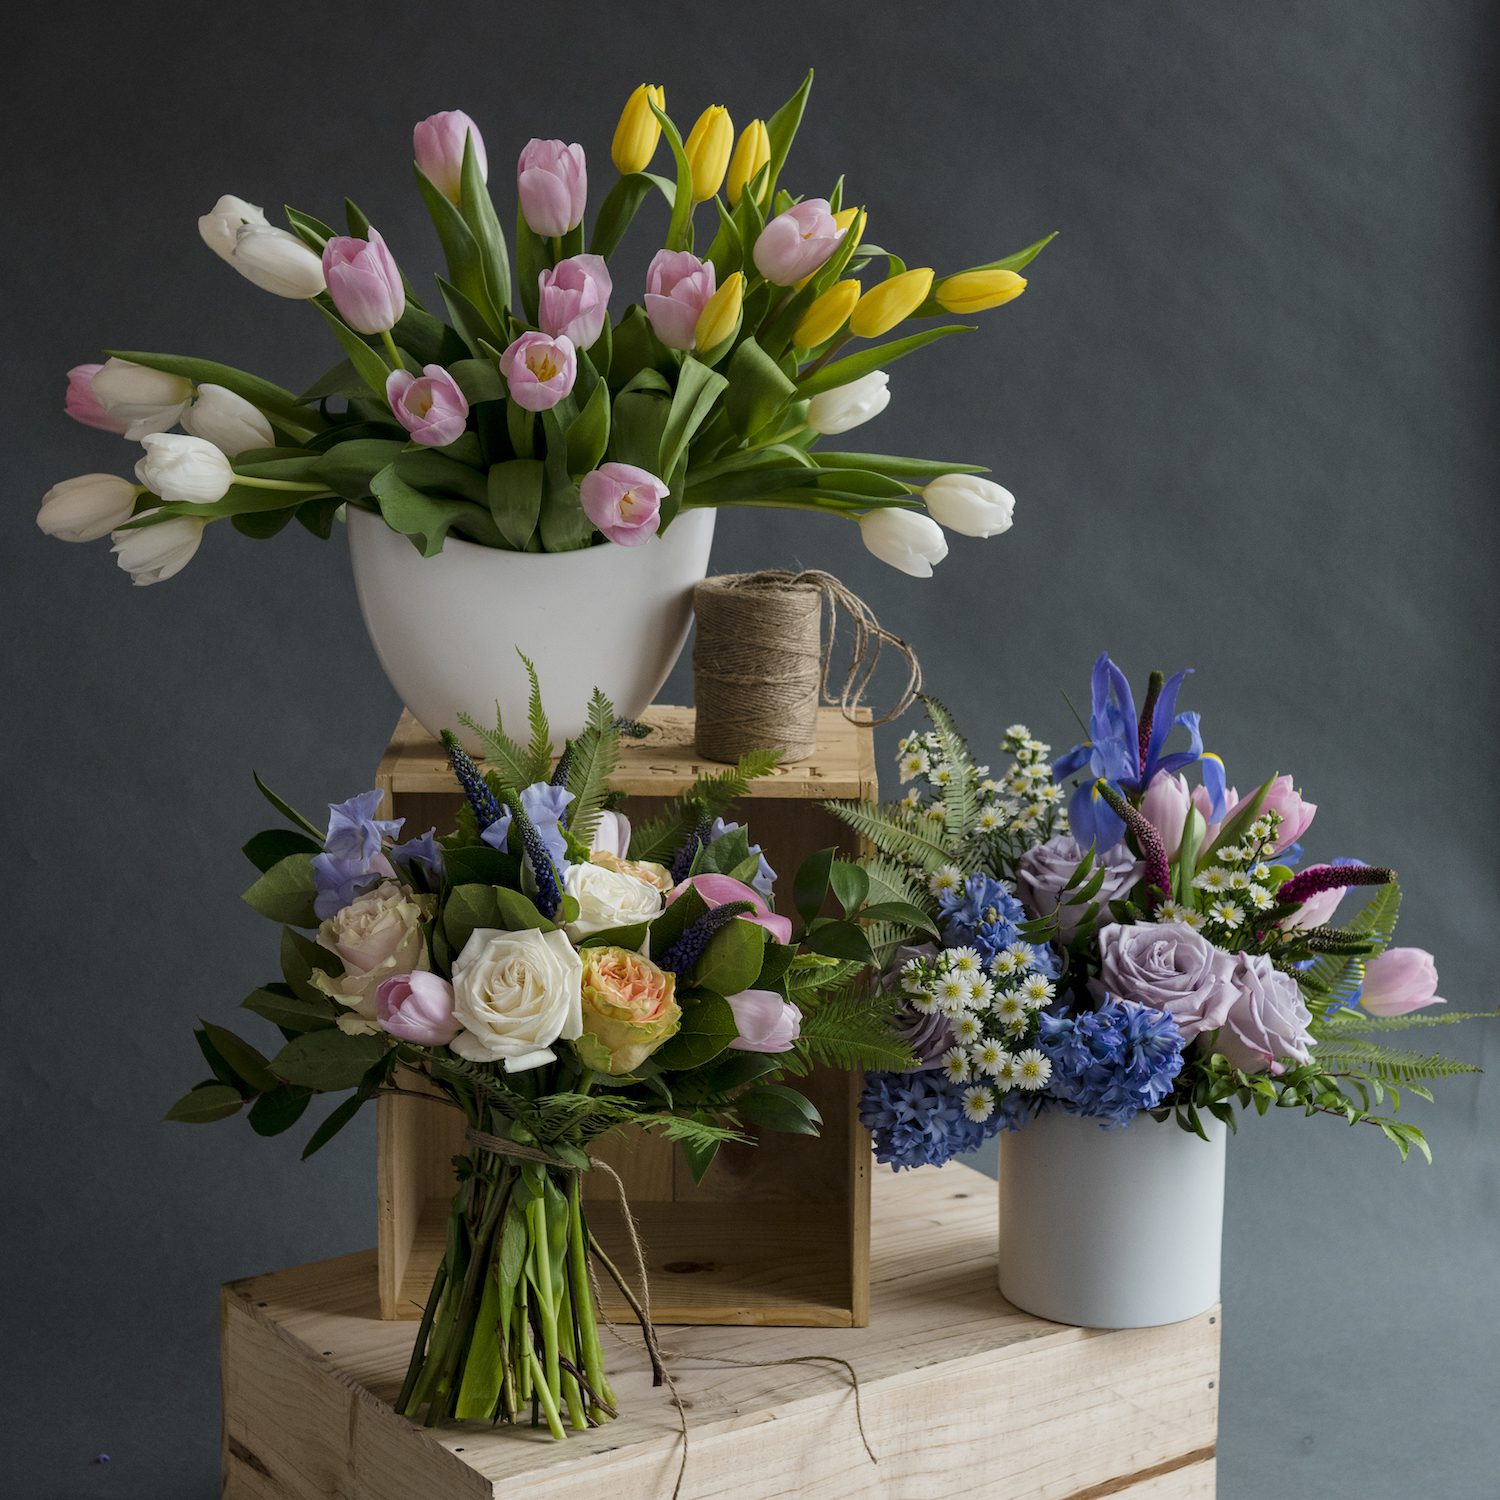 Our new Flower Market Collection features nine designs ranging in price from $65 to $85 plus delivery. Call us to order a design for pick-up beginning at $40.